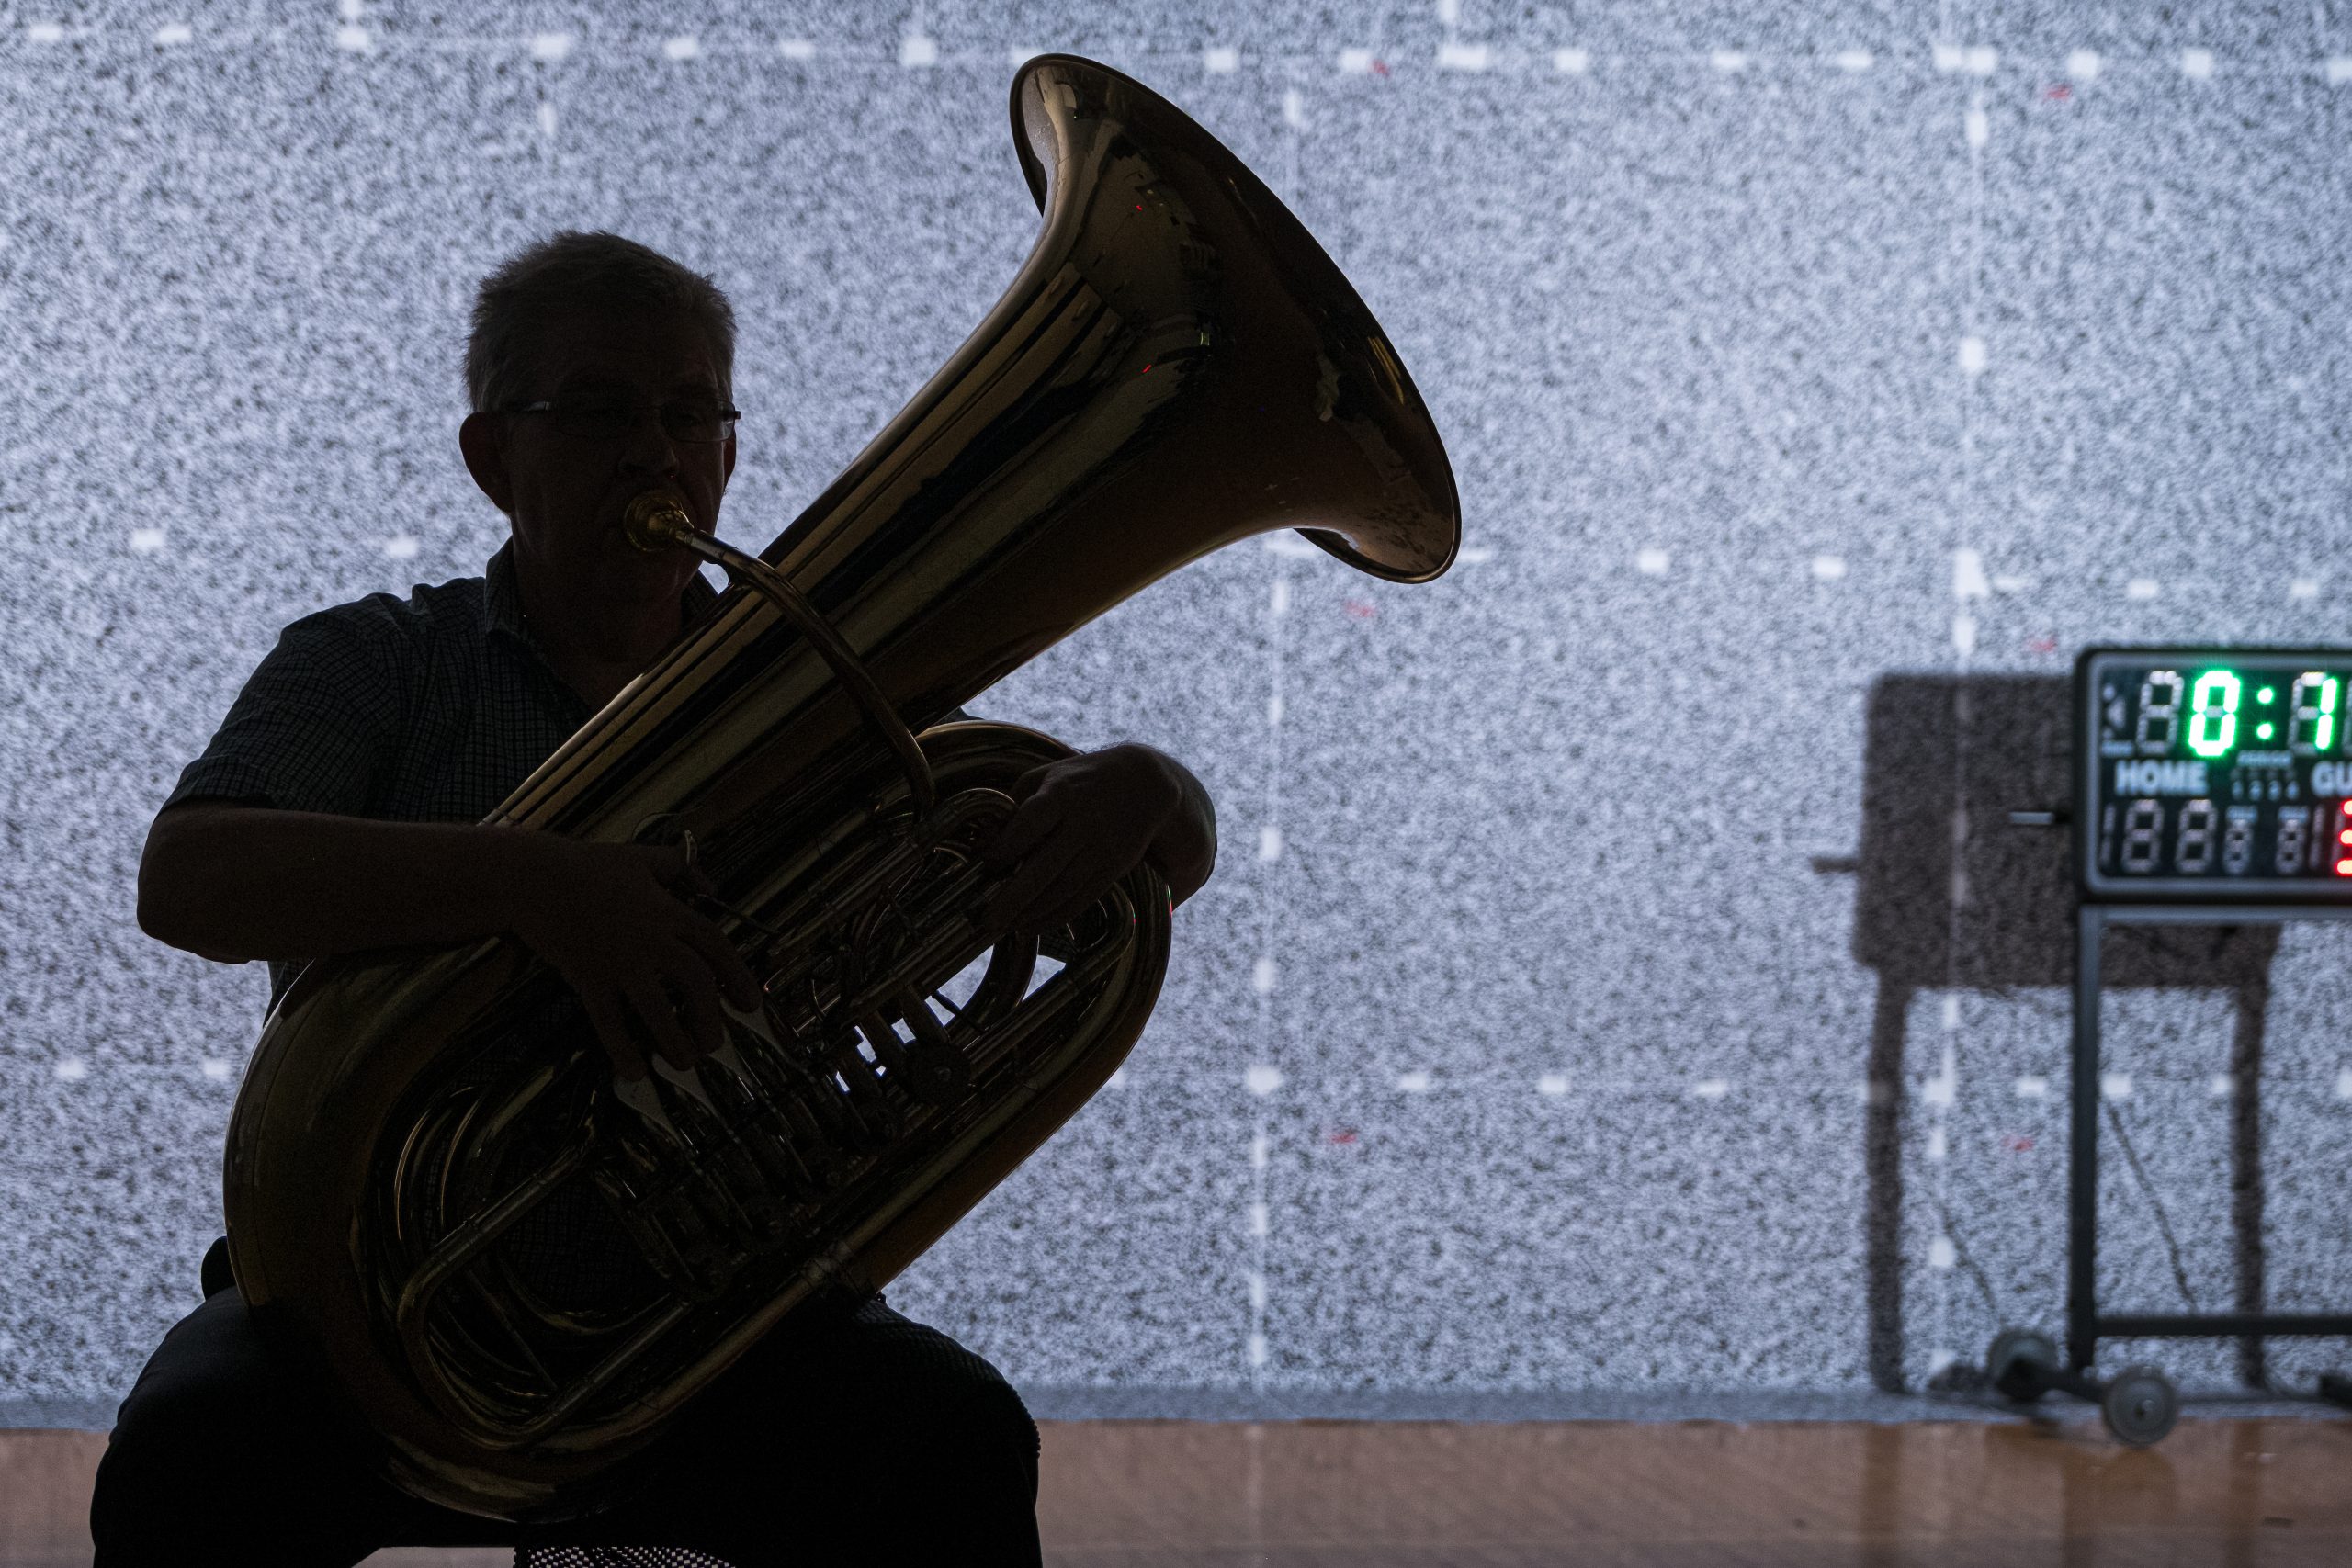 How Far Does The Spray From A Tuba Travel? Rice Researchers Study Social  Distancing For Musicians – Houston Public Media